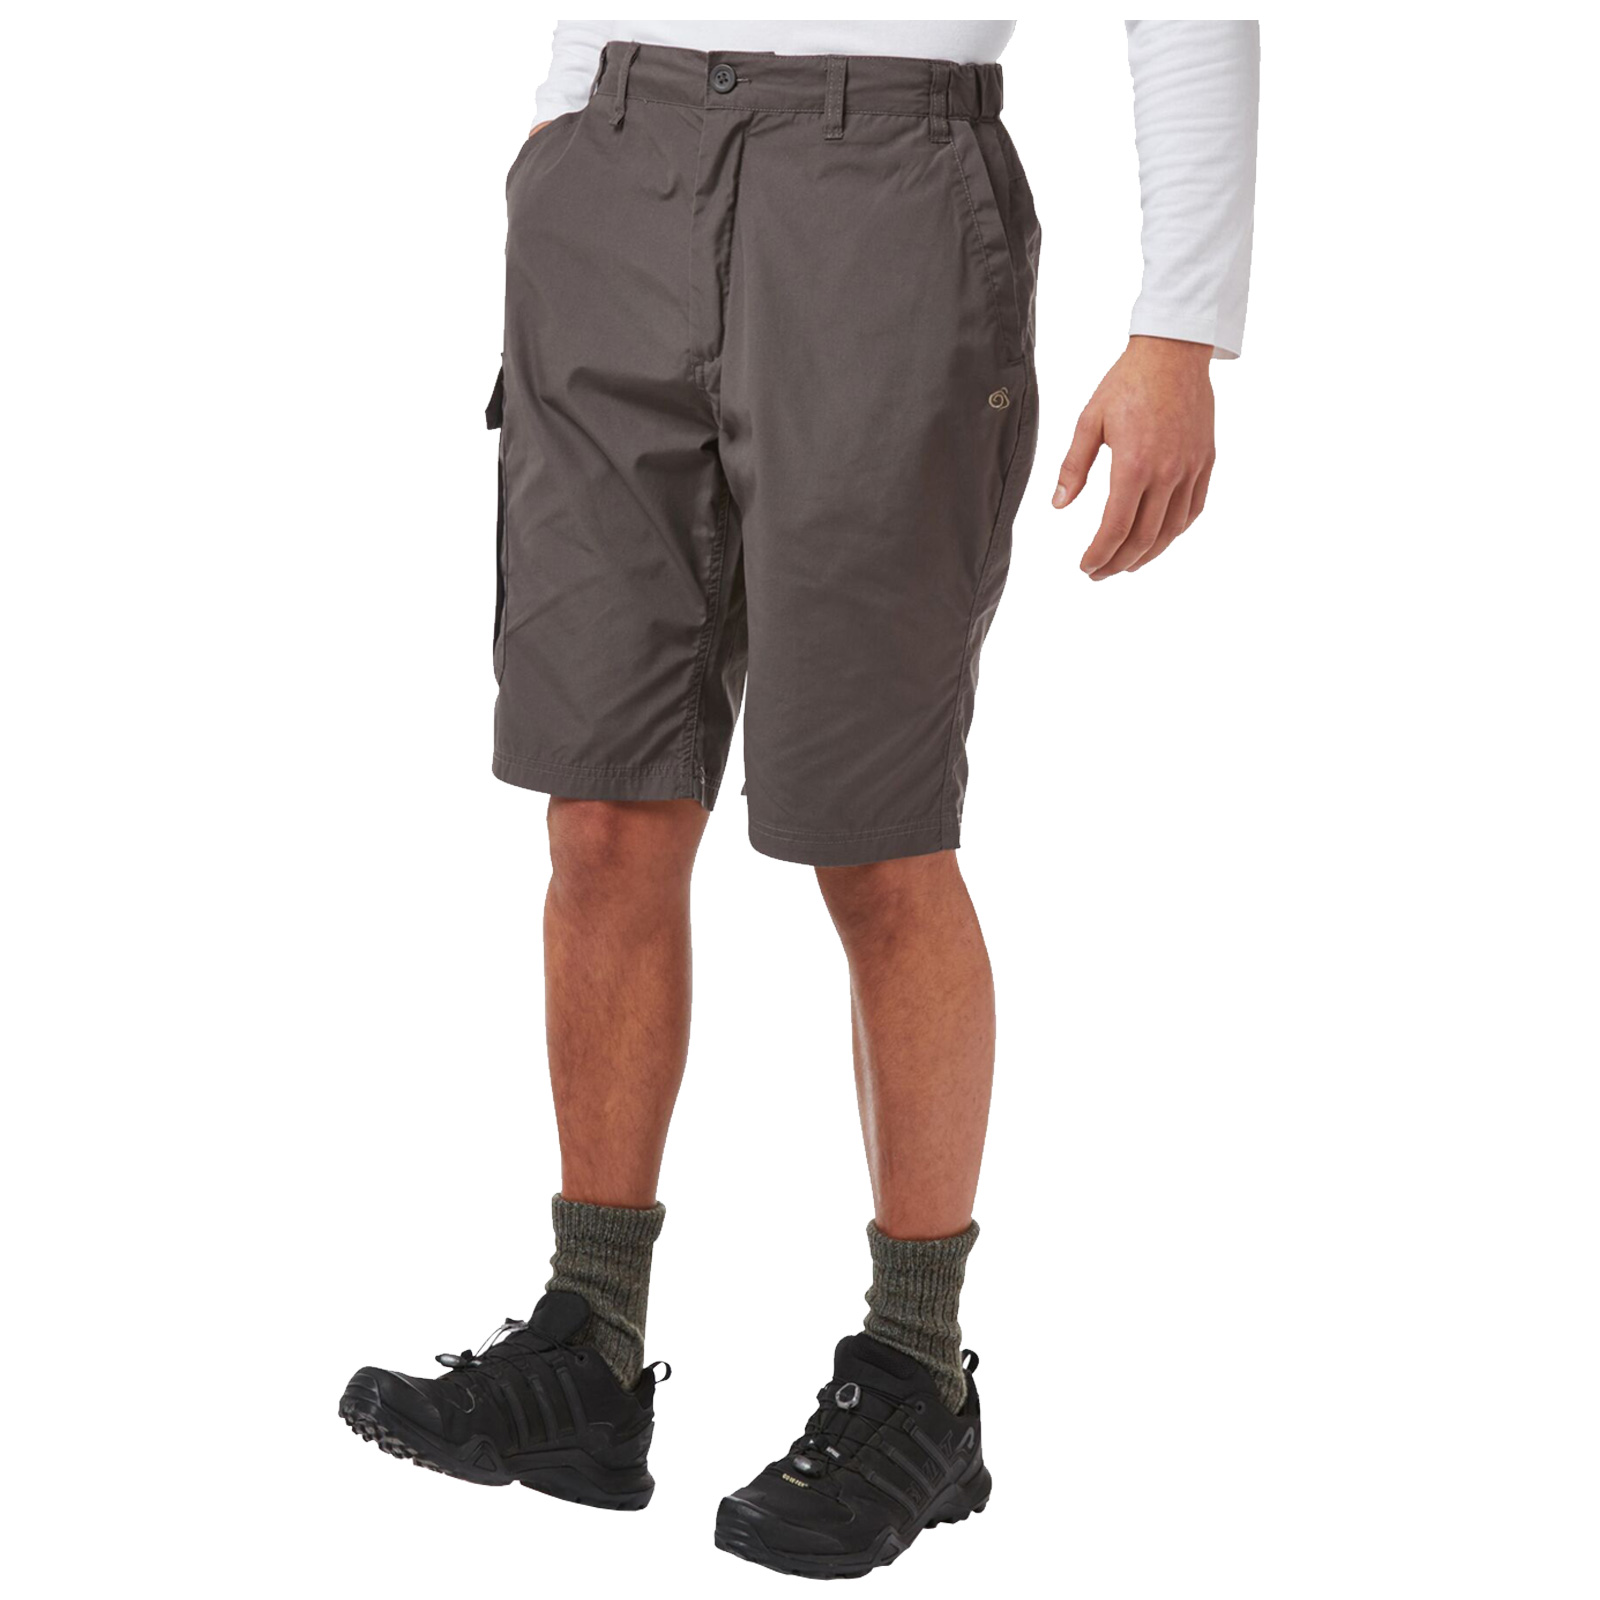 Craghoppers Mens Kiwi Long Stretch Fit Shorts Lightweight Casual Outdoors Pant 